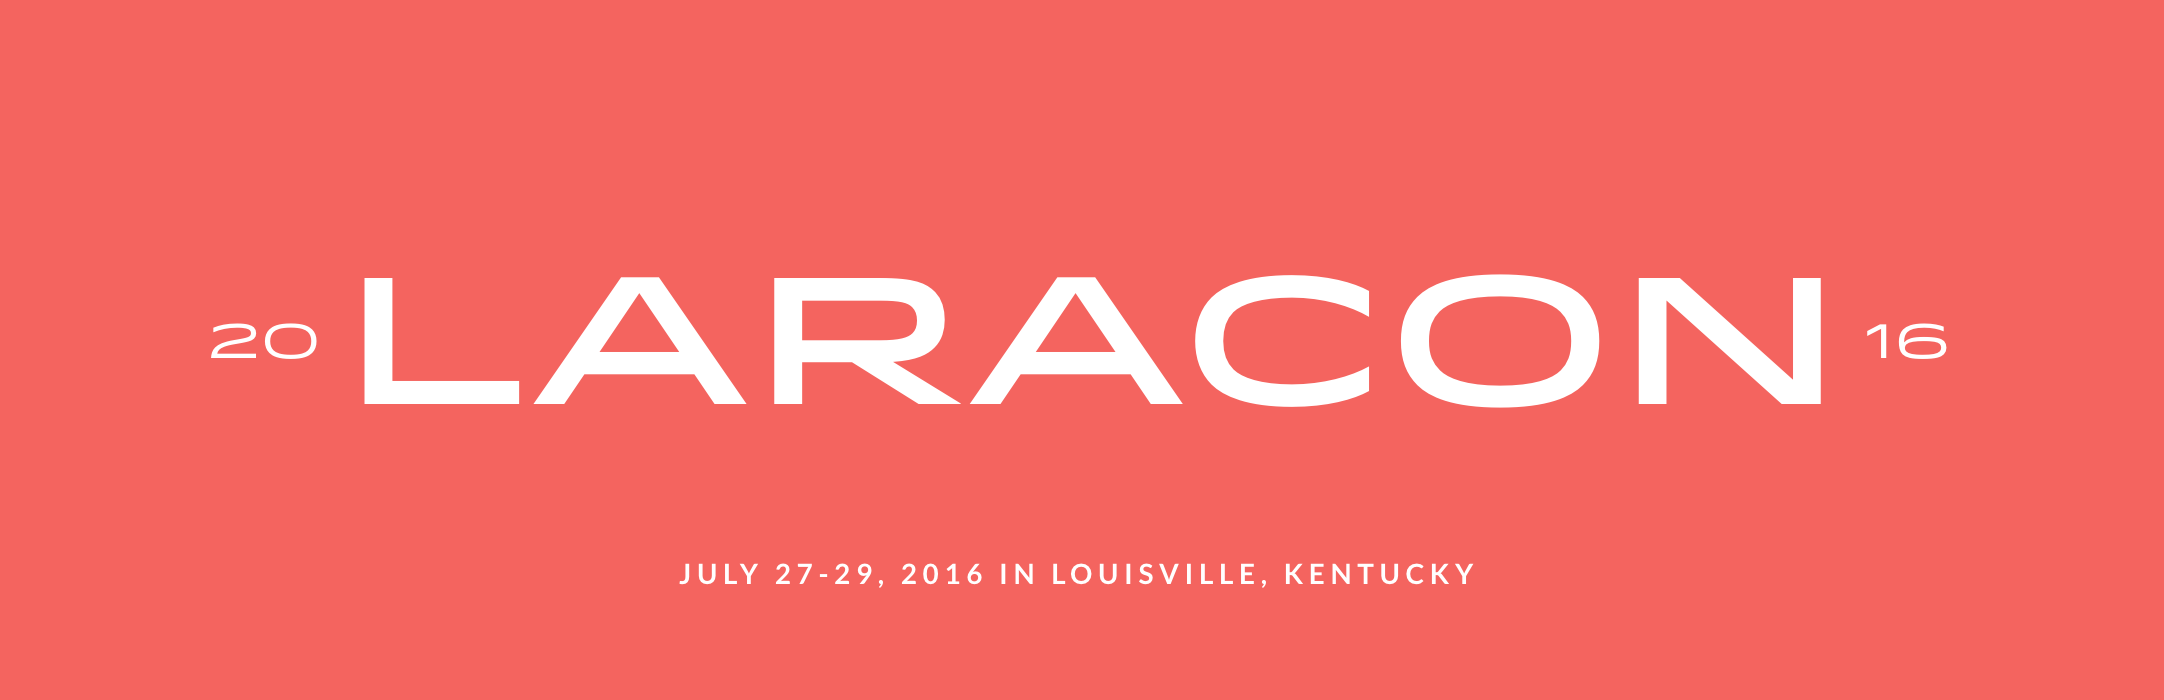 New Speakers Announced for Laracon.us image